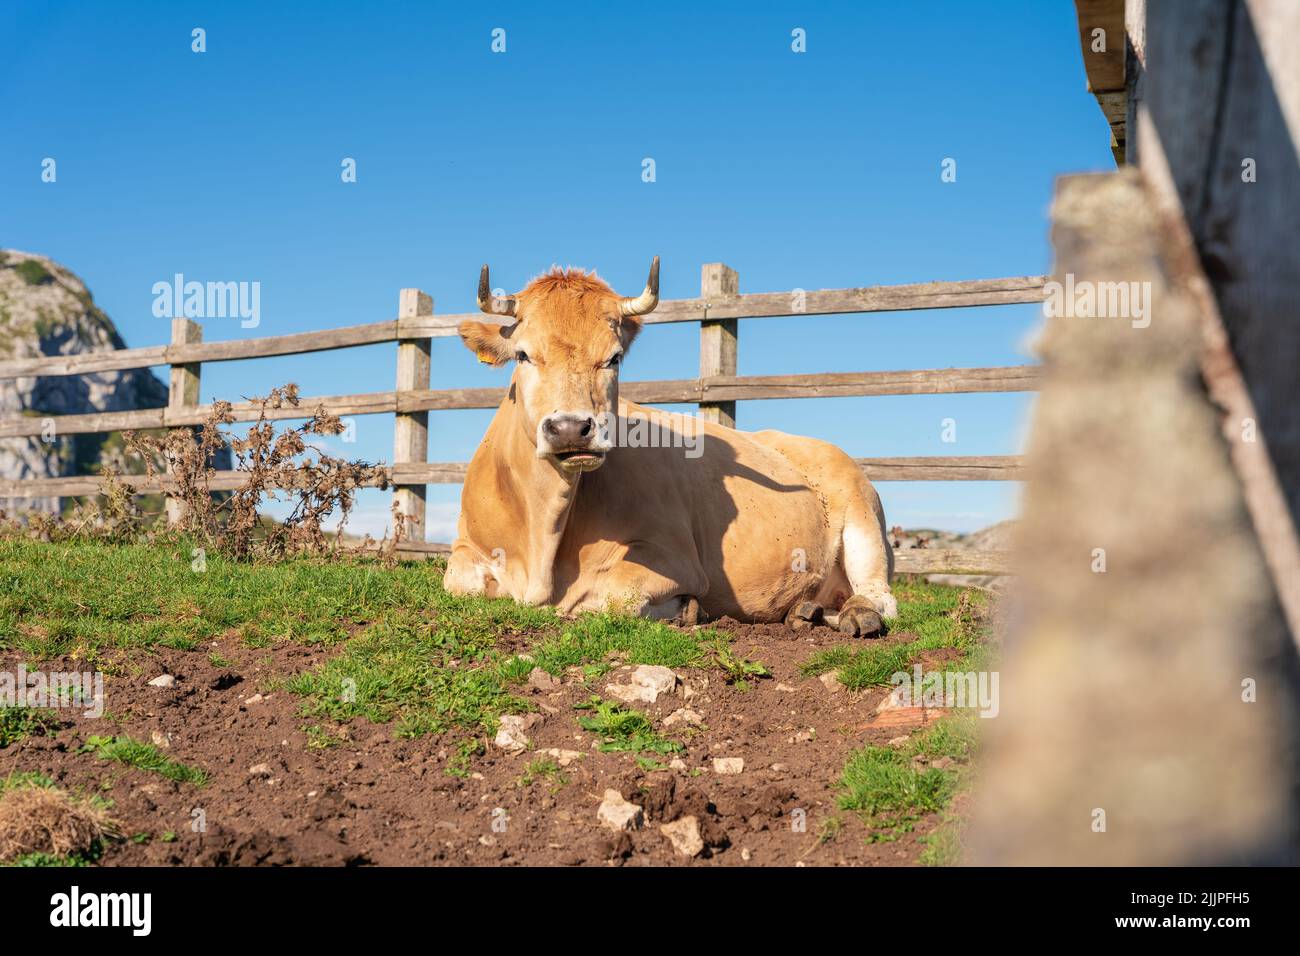 A brown cow sitting in a field next to a wooden fence Stock Photo